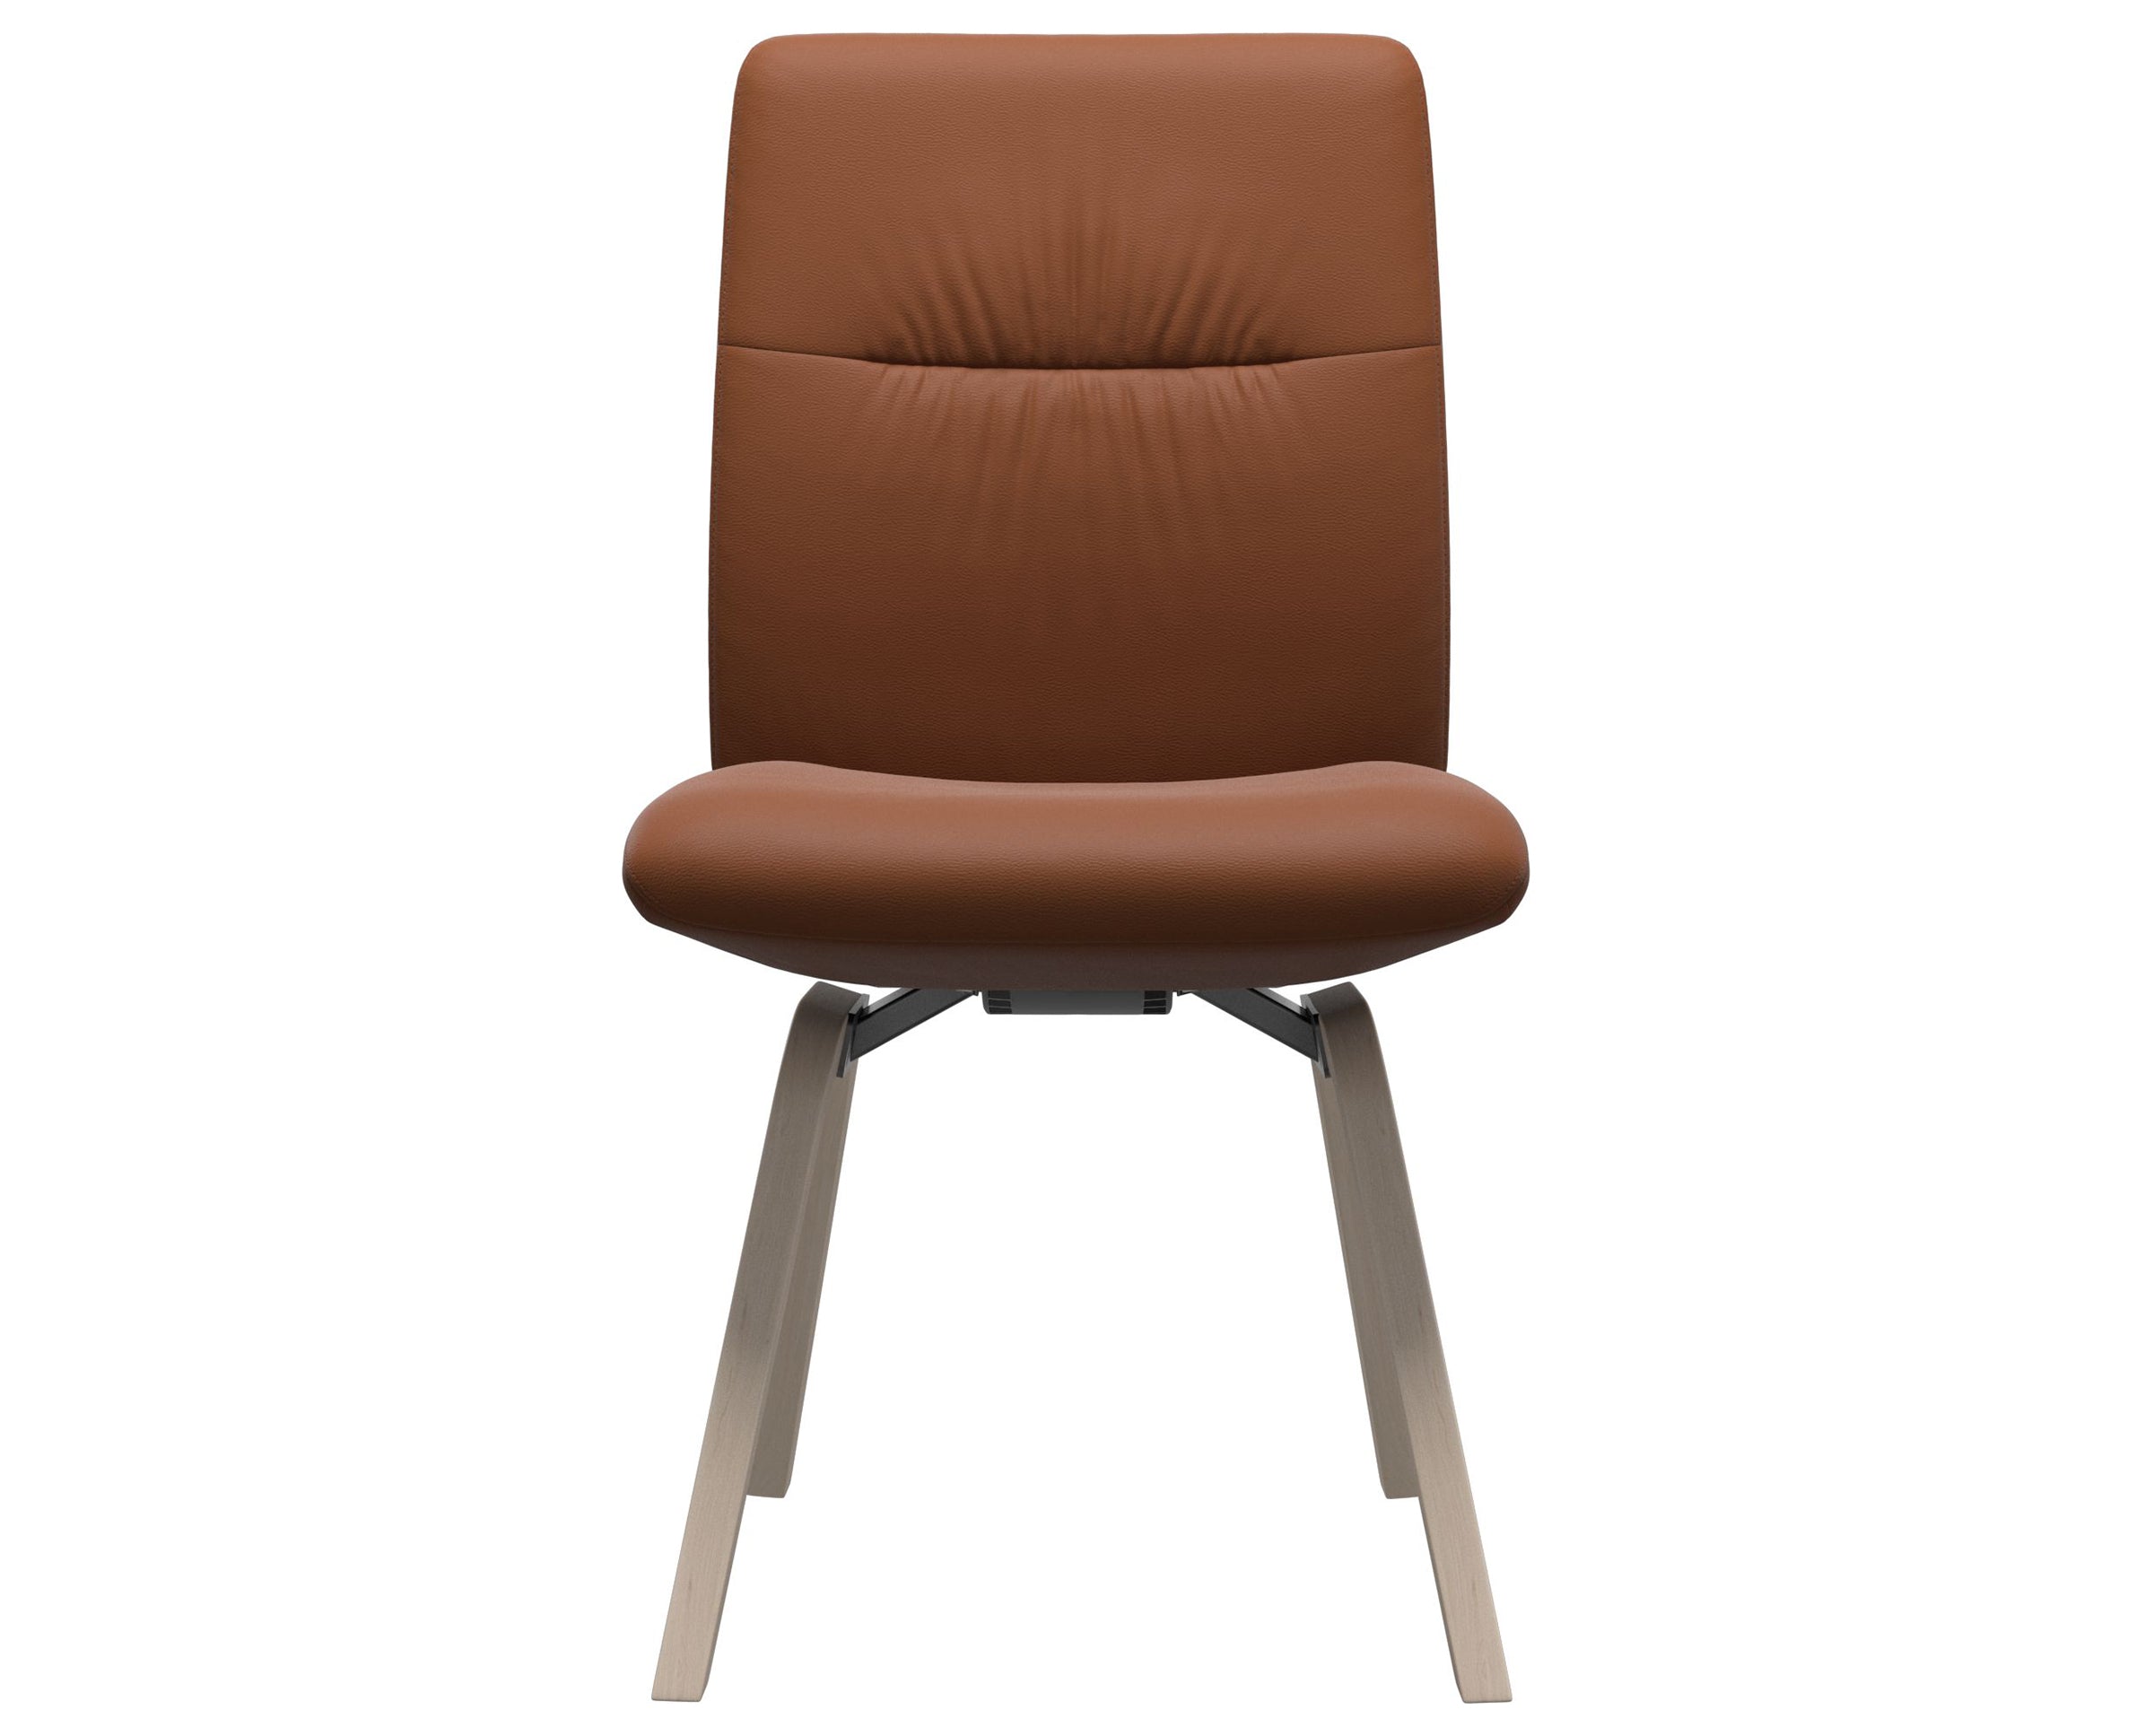 Paloma Leather New Cognac and Whitewash Base | Stressless Mint Low Back D200 Dining Chair | Valley Ridge Furniture